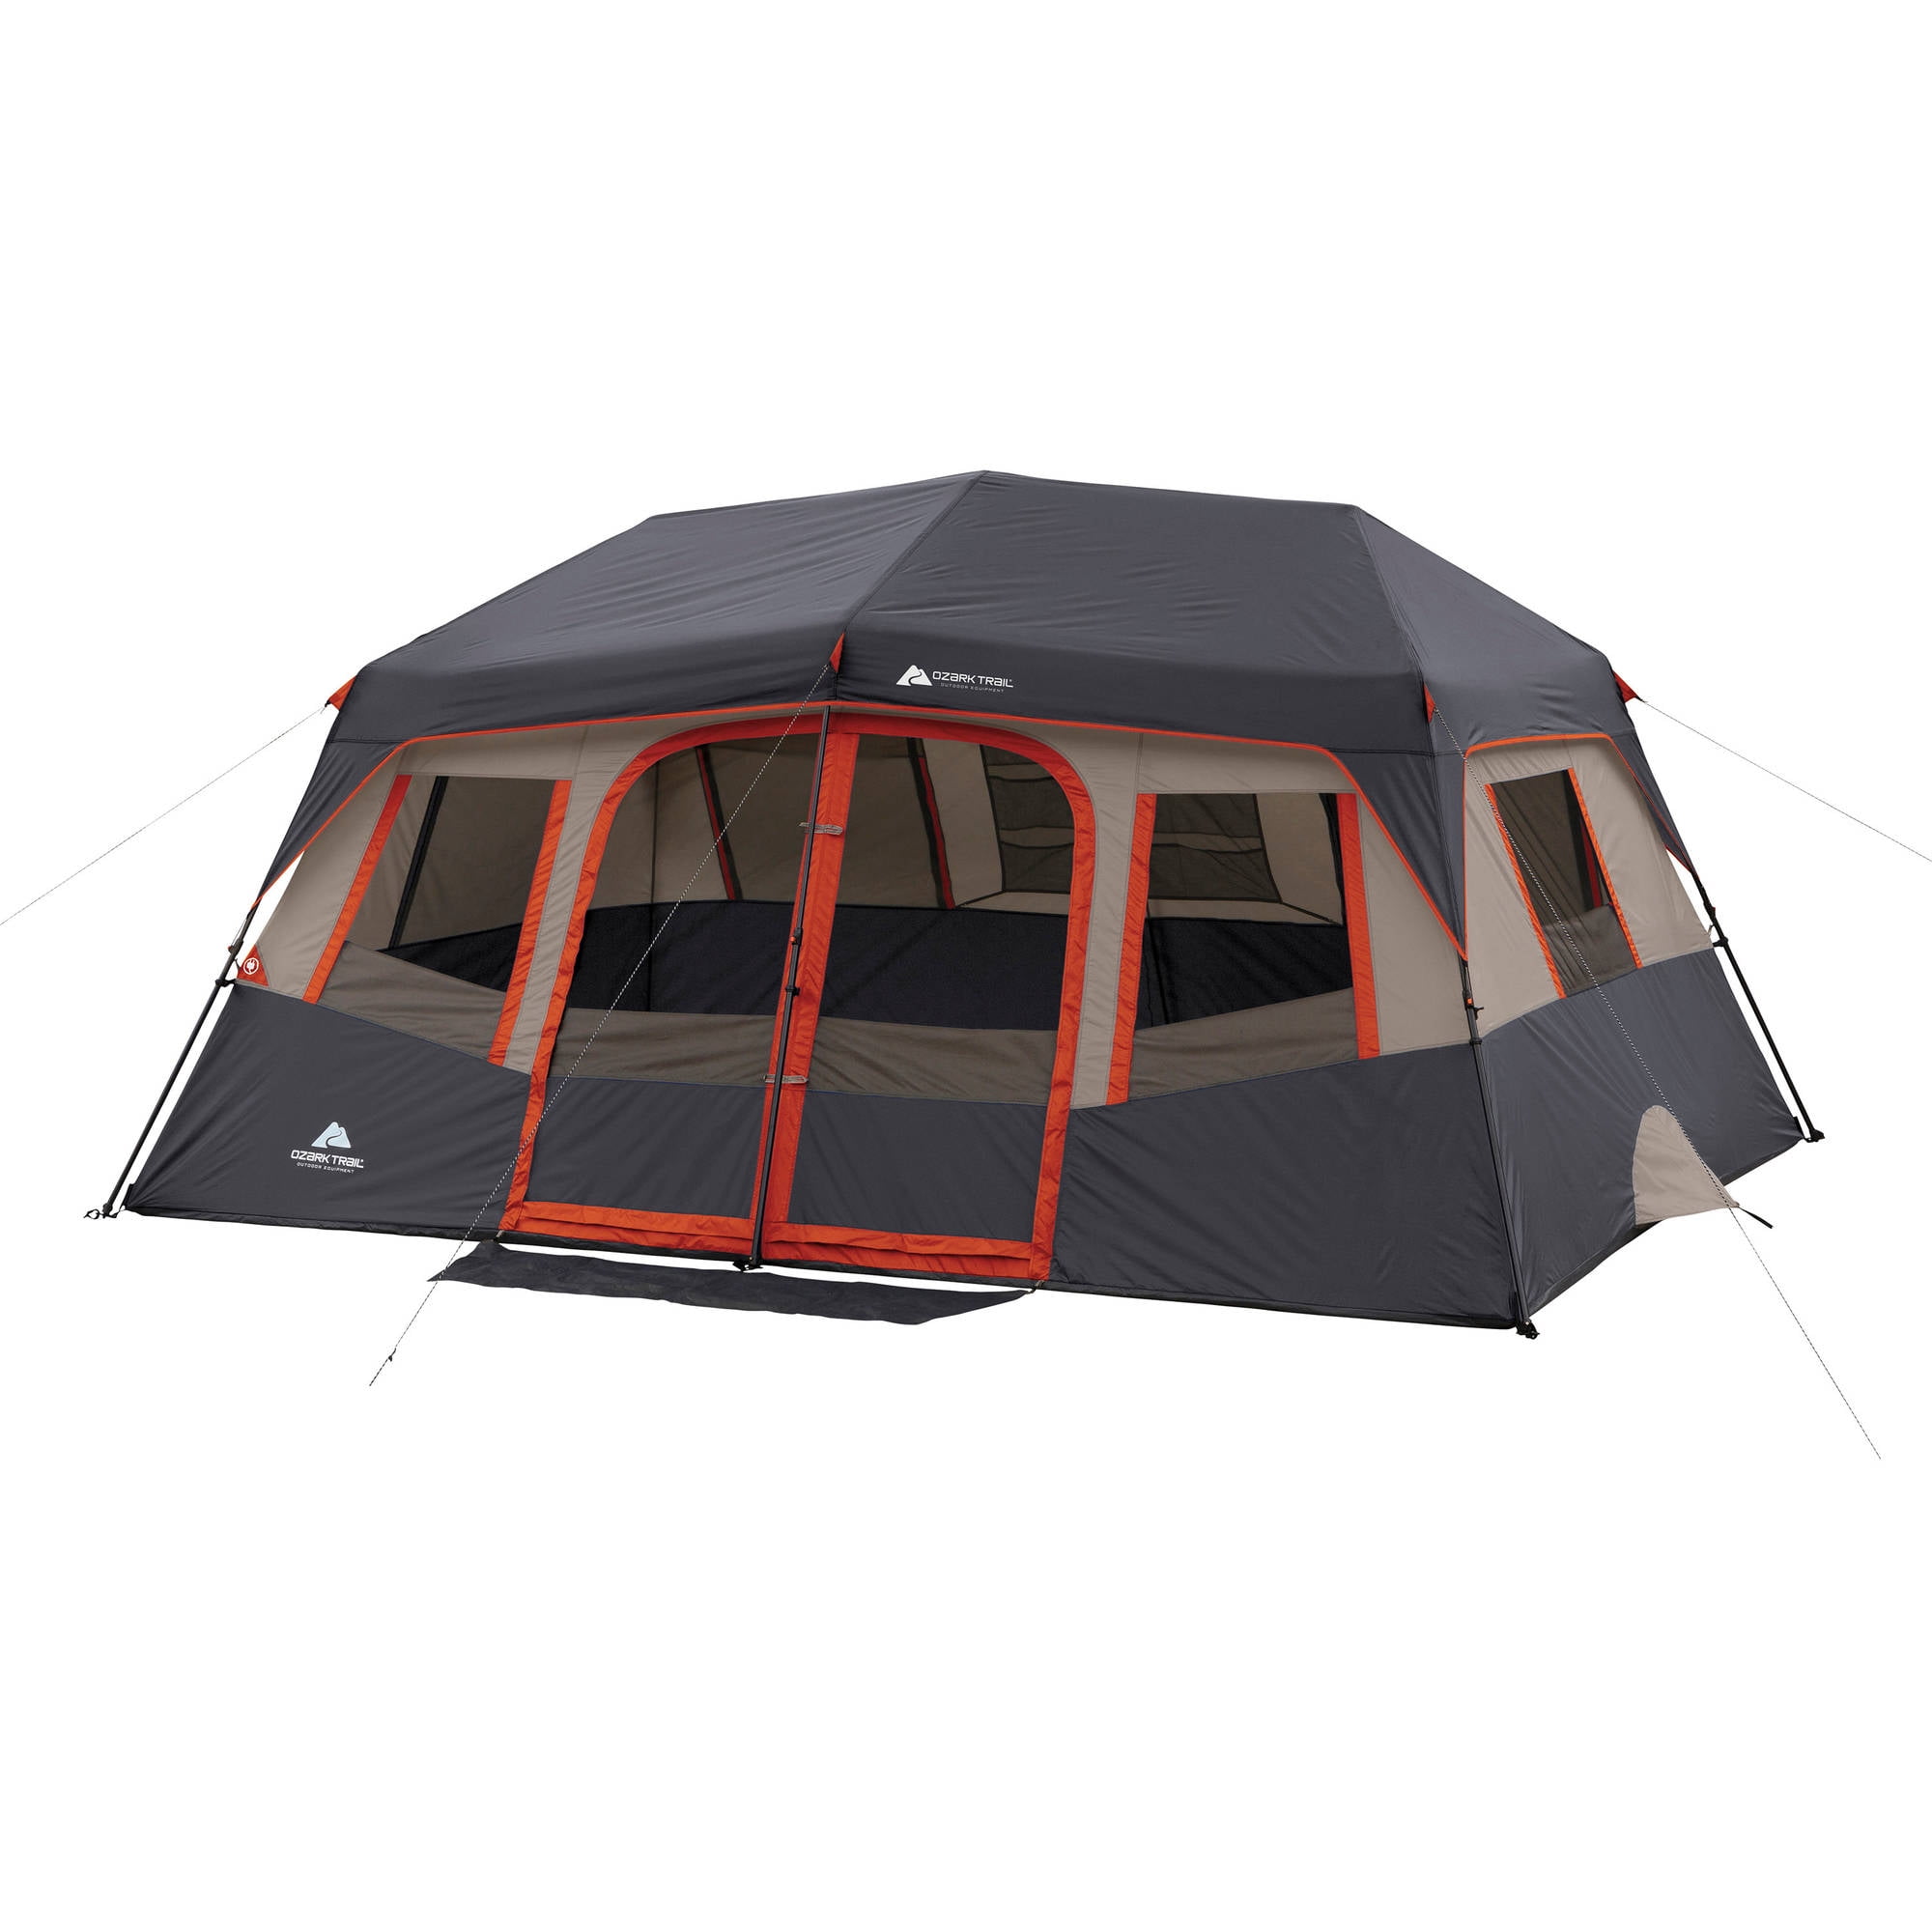 CORE Equipment 10 Person Lighted Instant Cabin Tent with Awning